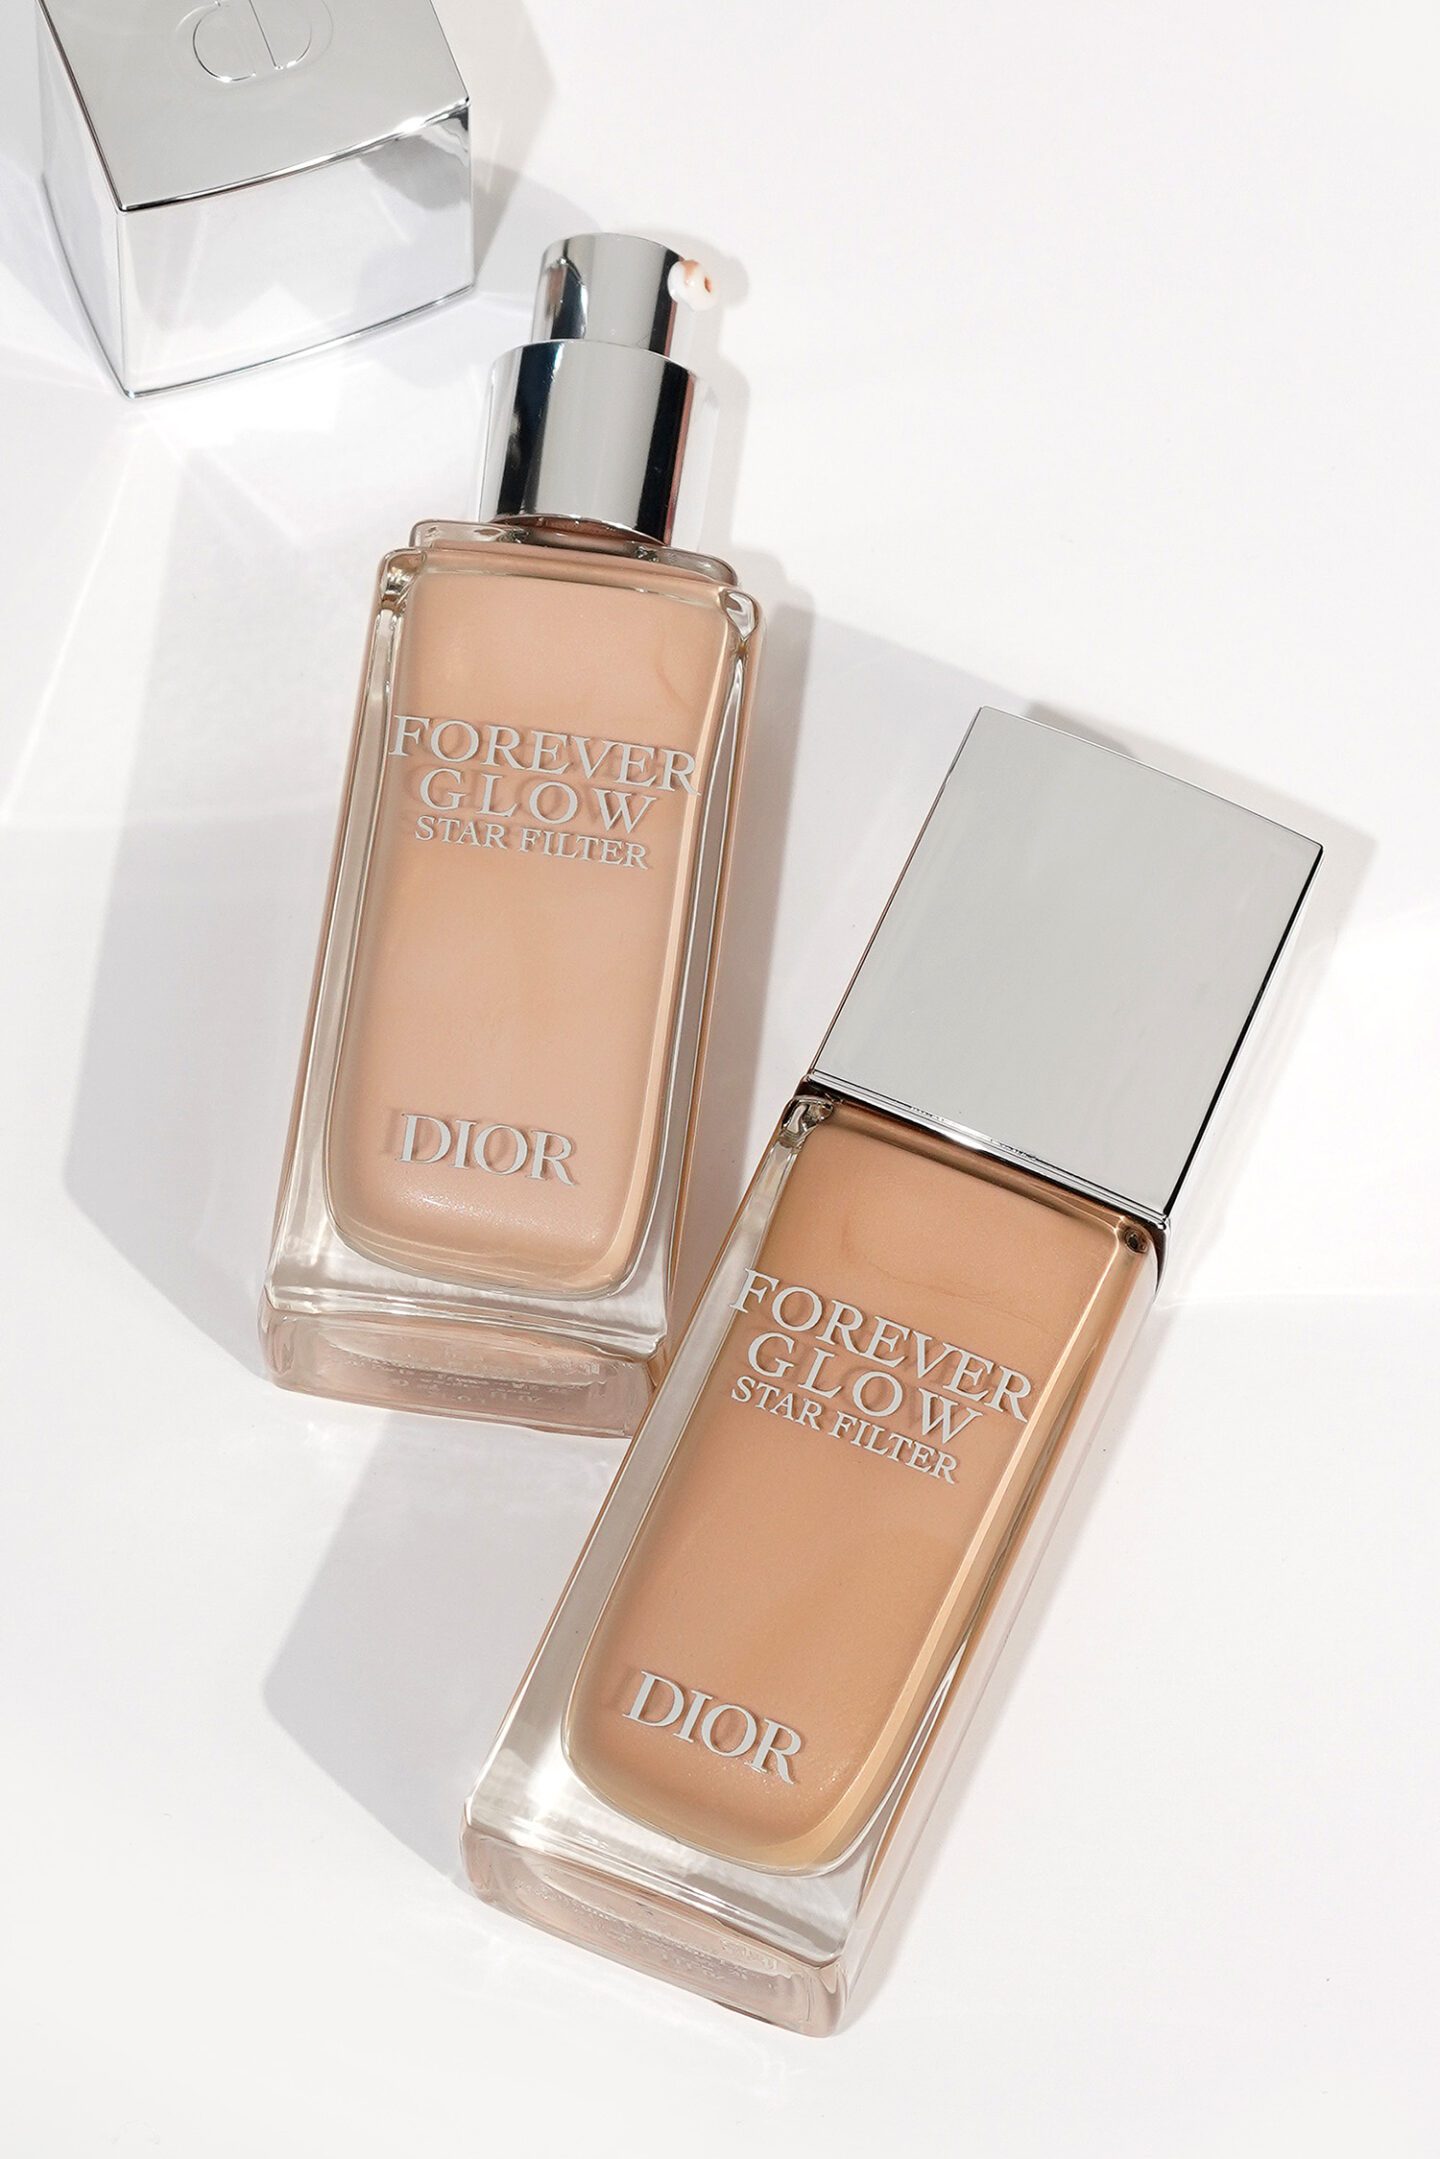 Dior Beauty Forever Glow Star Filter Shade 2 and 3